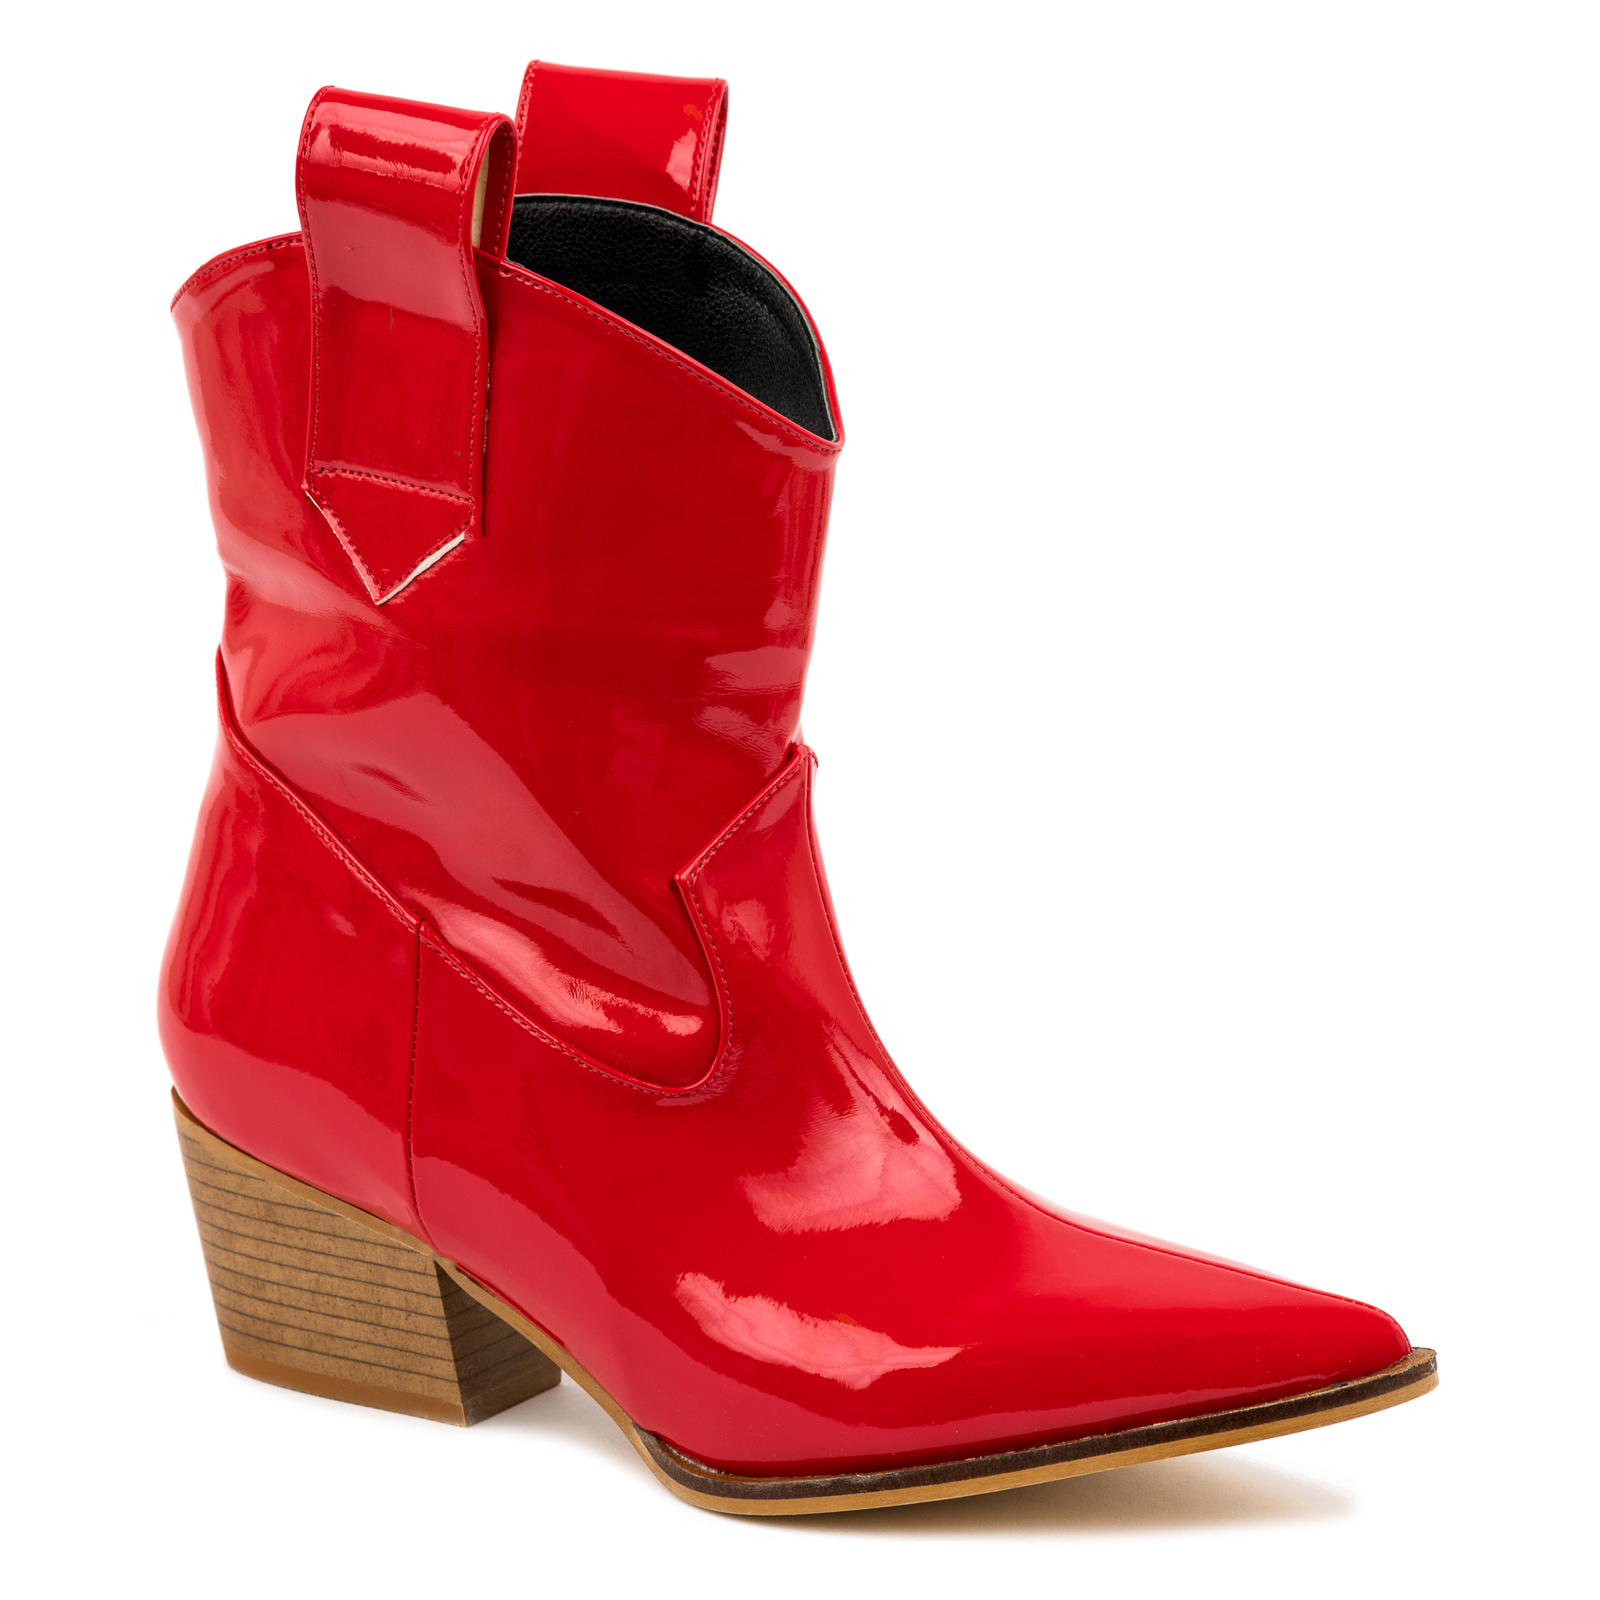 PATENT SPIKE COWGIRL BOOTS - RED 